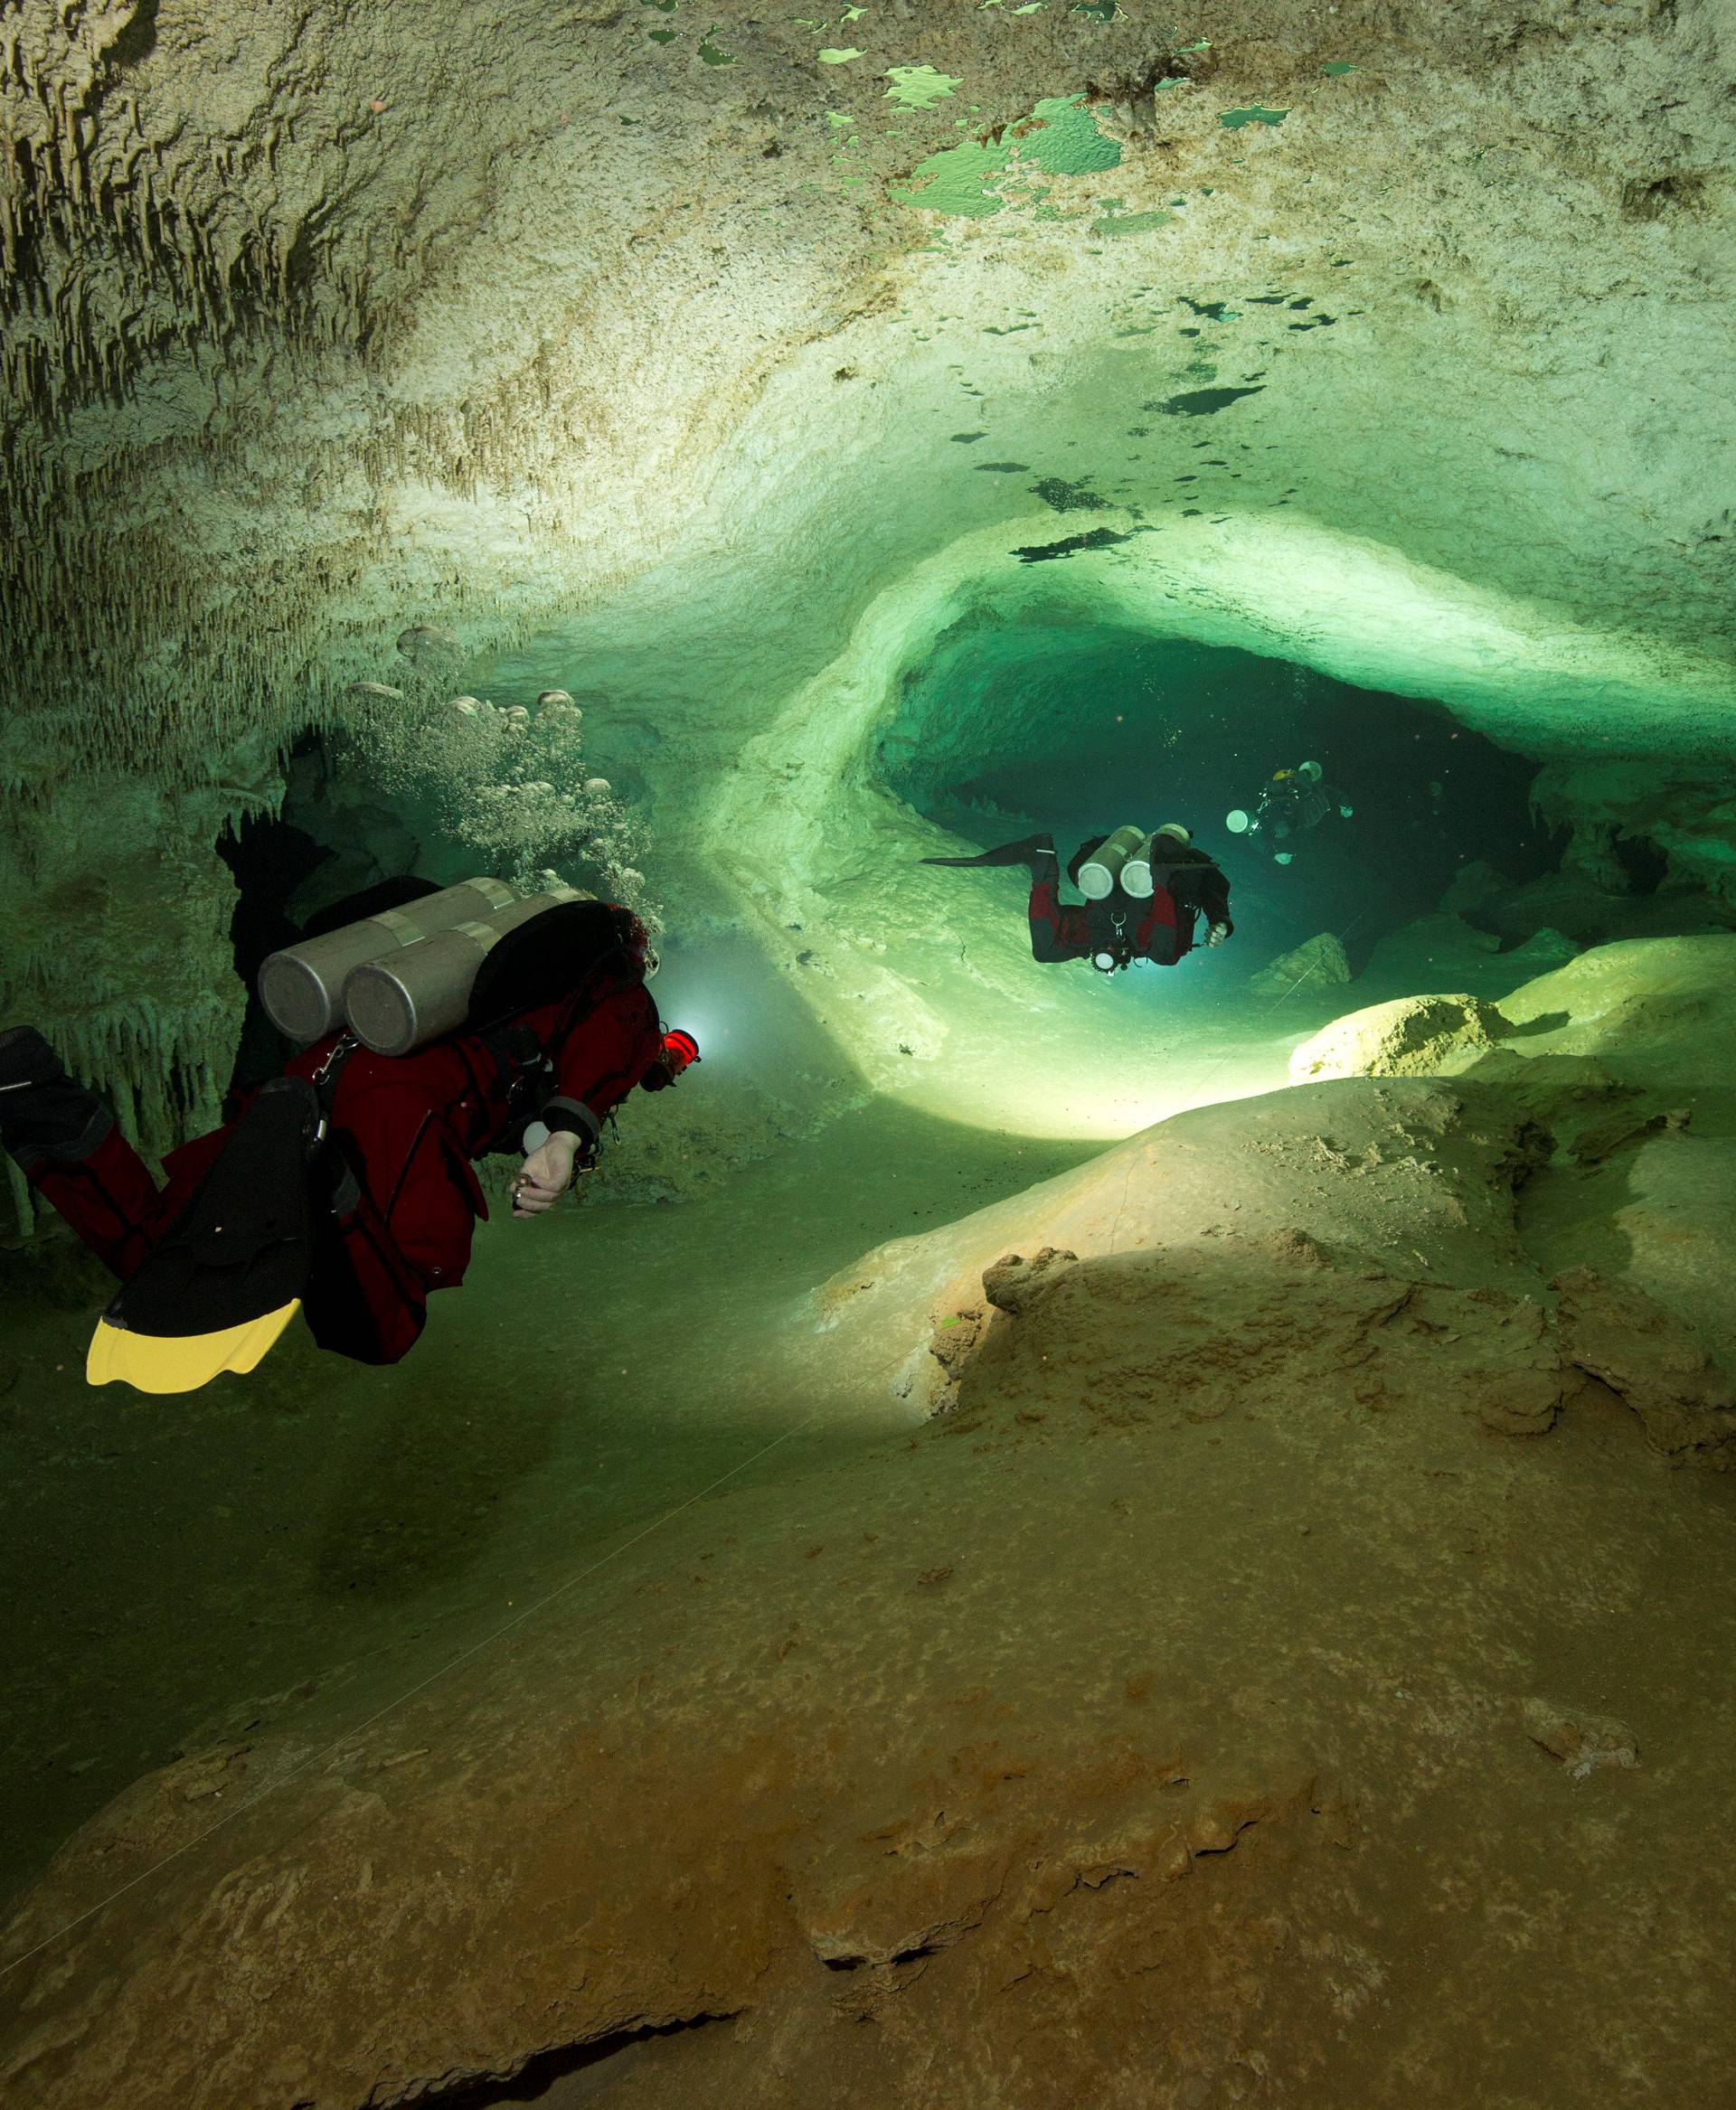 Scuba divers tour an authorized area of Sac Aktun underwater cave system as part of the Gran Acuifero Maya Project near Tulum